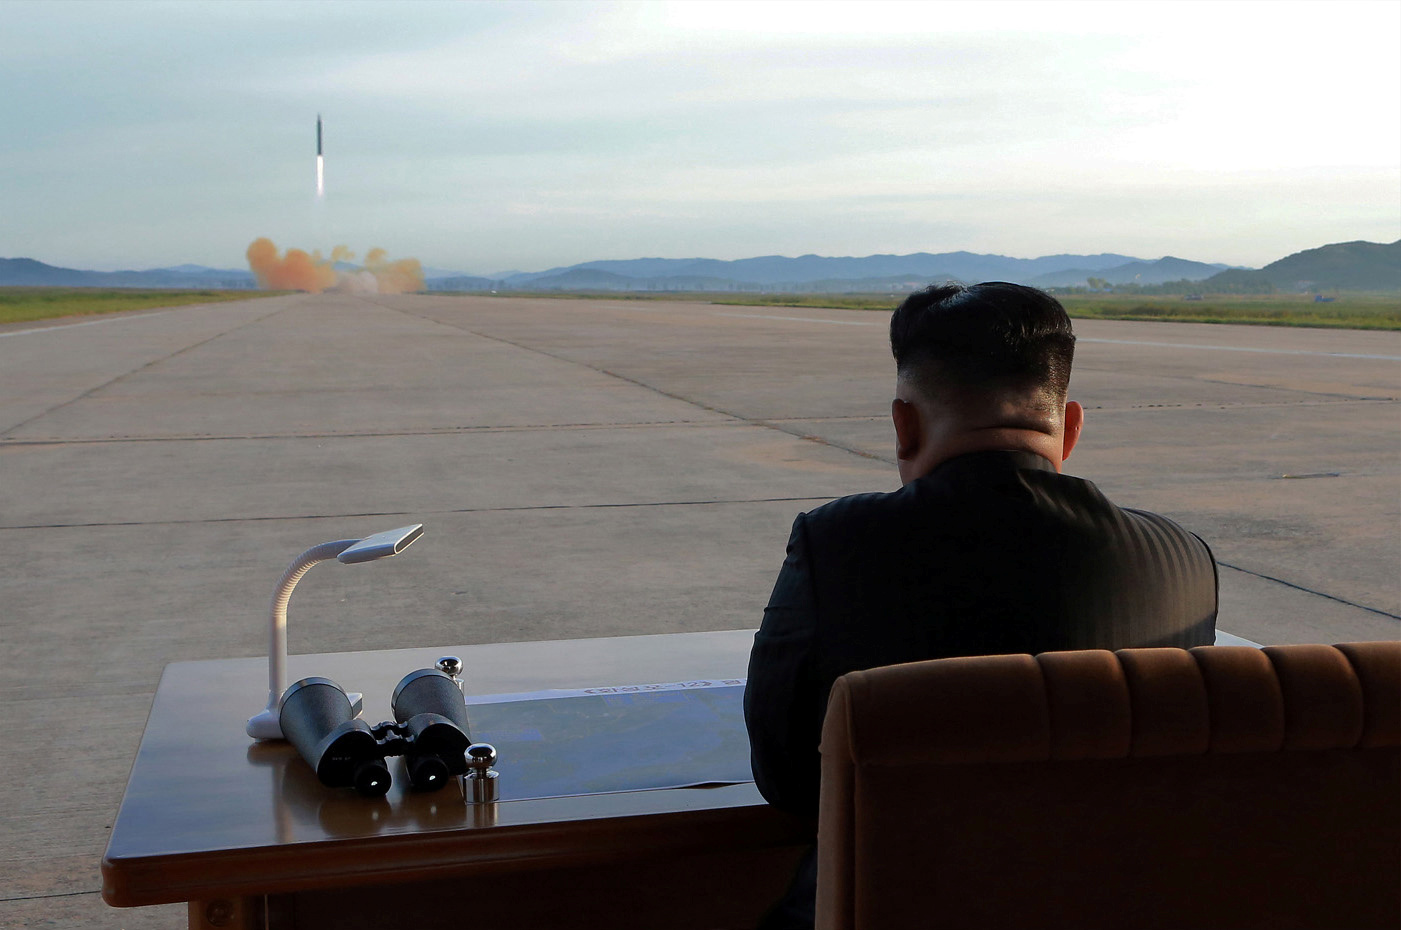 North Korean leader Kim Jong Un watches the launch of a Hwasong-12 intermediate-range ballistic missile in this photo released in September 2017. Nuclear-armed Pyongyang could be weighing a summit — or provocation — ahead of November's U.S. presidential election, experts say. | KCNA / VIA REUTERS